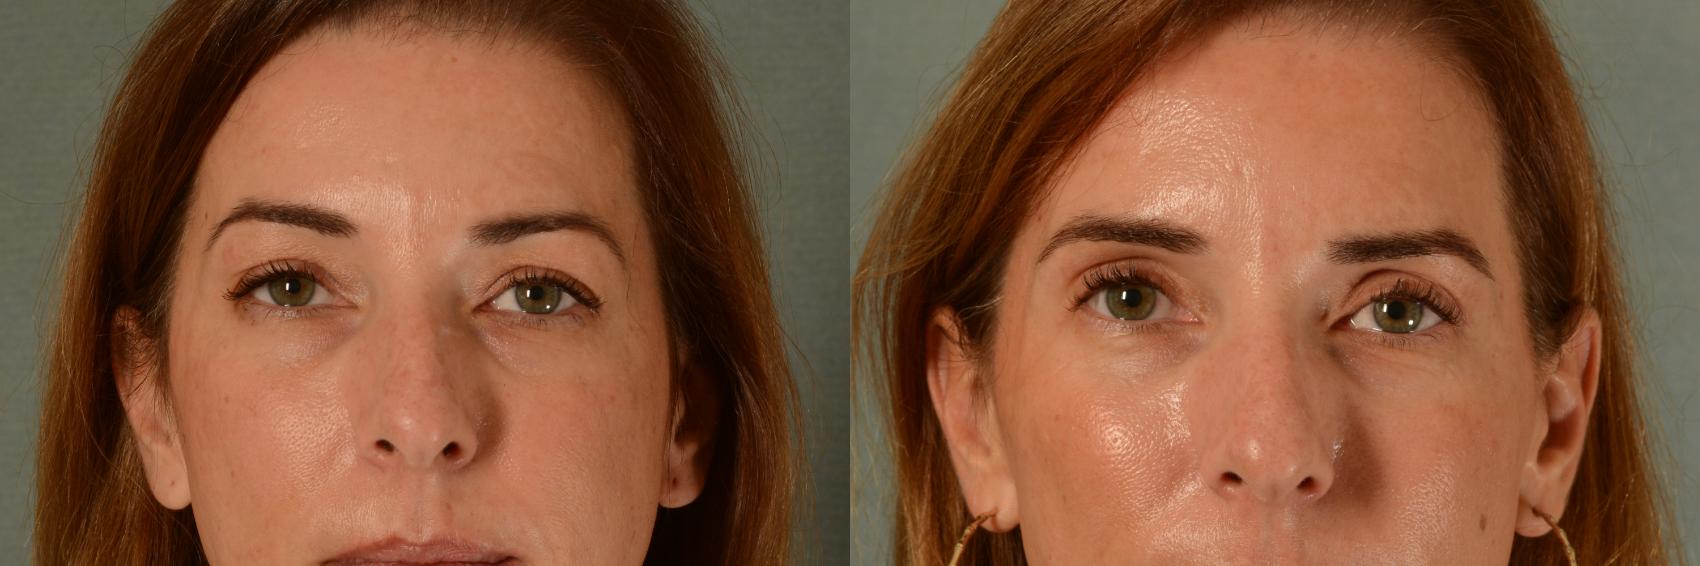 Before & After Eyelid Surgery (Blepharoplasty) Case 443 Front View in Tallahassee, FL